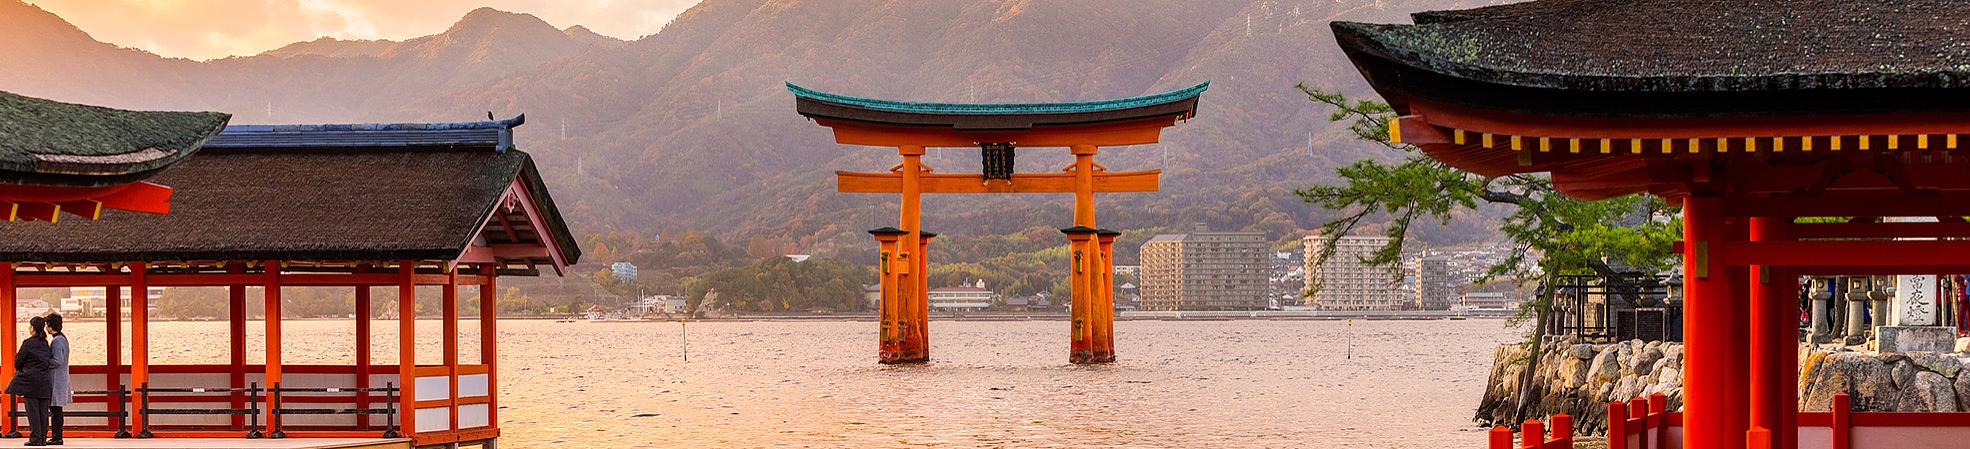 A Complete Travel Guide to Hiroshima